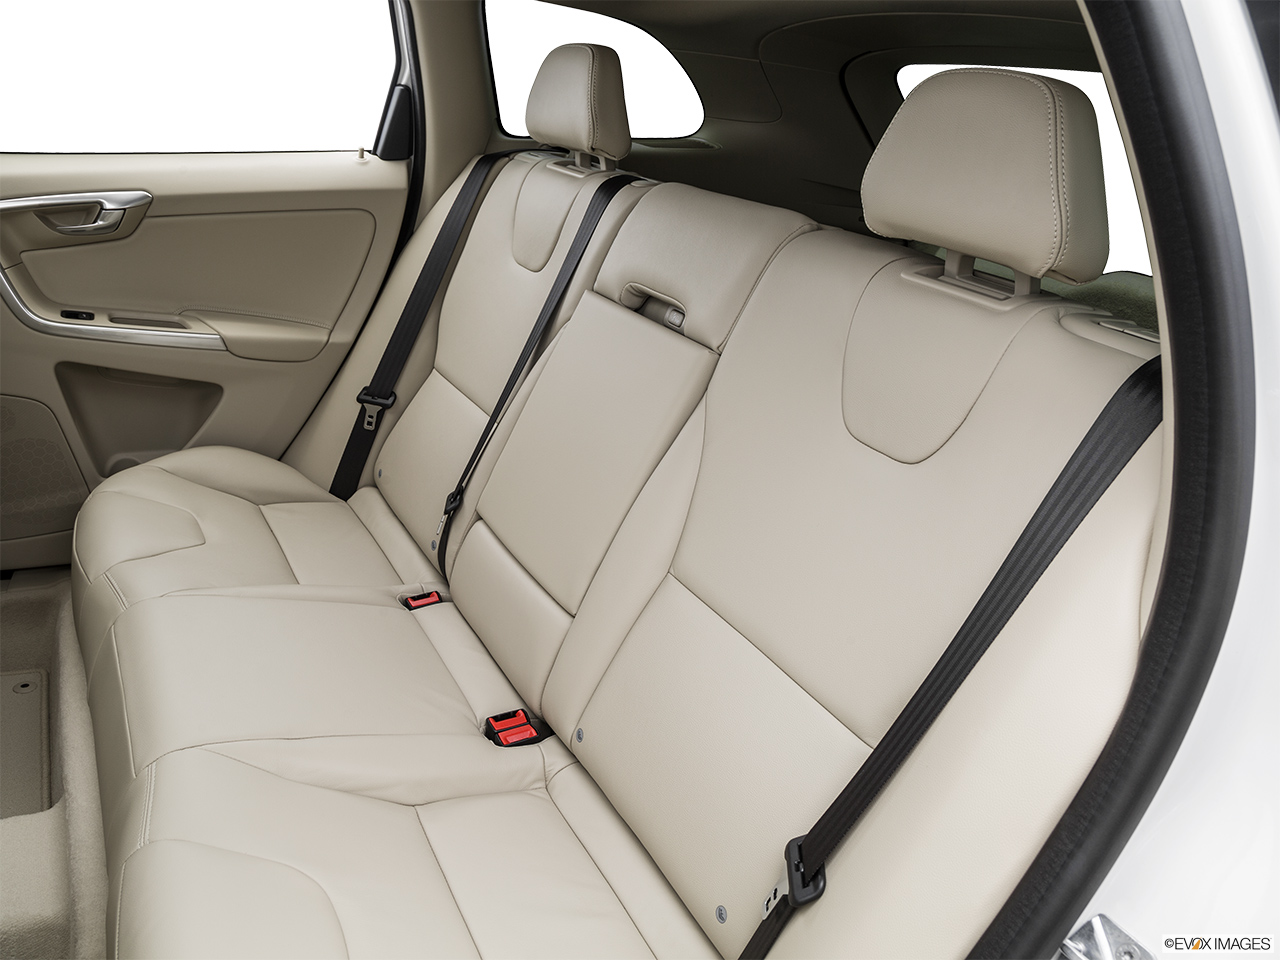 2016 Volvo XC60 T5 Drive-E FWD Premier Rear seats from Drivers Side. 